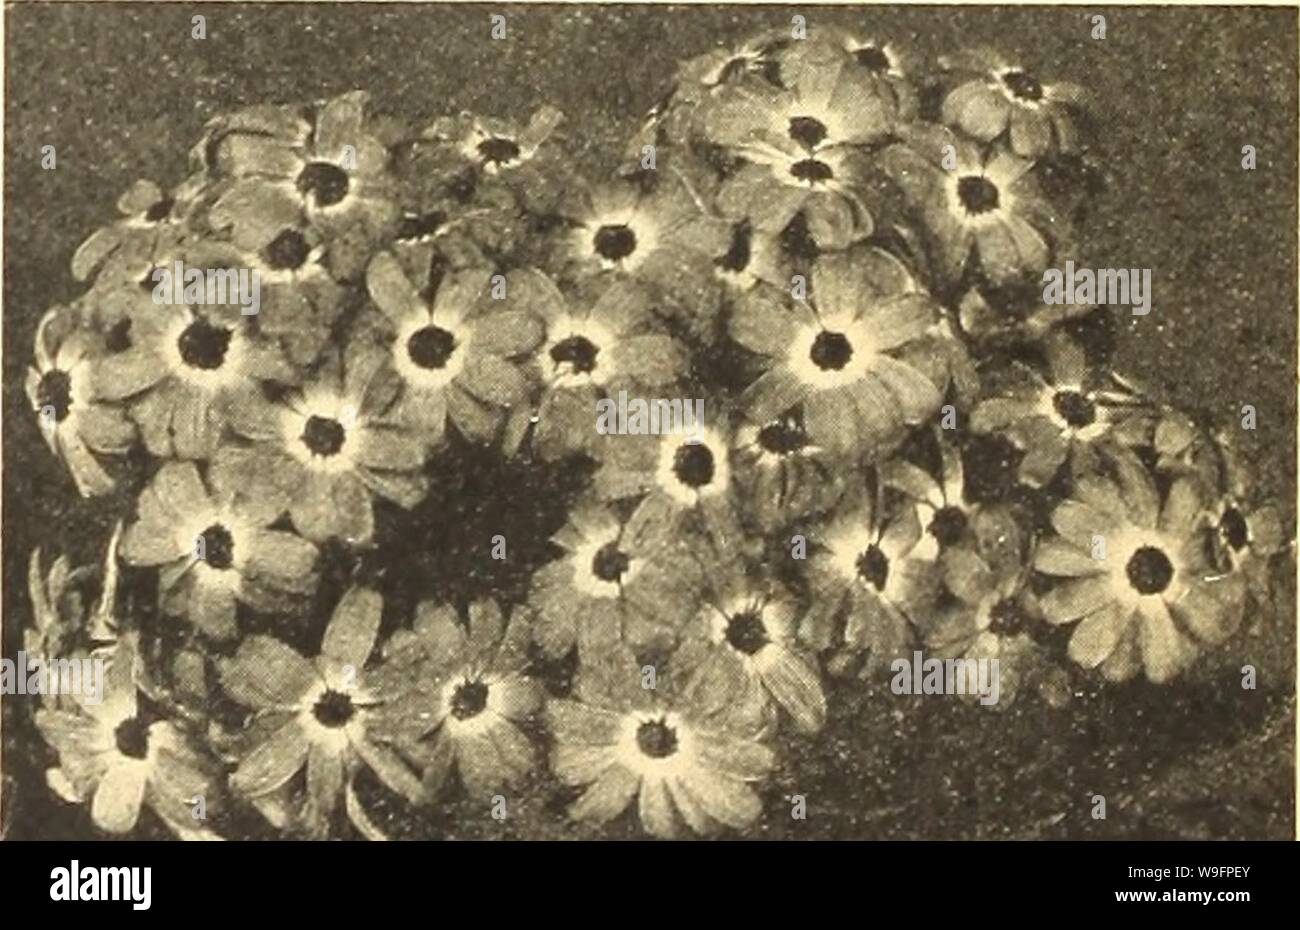 Archive image from page 61 of Currie's farm and garden annual. Currie's farm and garden annual : spring 1921 46th year  curriesfarmgarde19curr 4 Year: 1921 ( AVhite Purls Daisy. The varieties known as C. Hybrida are well known and exceed- ingly brilliant greenhouse plants. C. Maritima or Dusty Miller is cultivated for its silvery foliage, and esteemed as one of the best plants of that kind for ribbon borders. H. H. P. Pkt. Currie's Matchless (Hybrida)—This strain is unexcelled for size of blooms, brilliancy of colors and fine substance. Many of the flowers are 4 inches across, and the variety Stock Photo